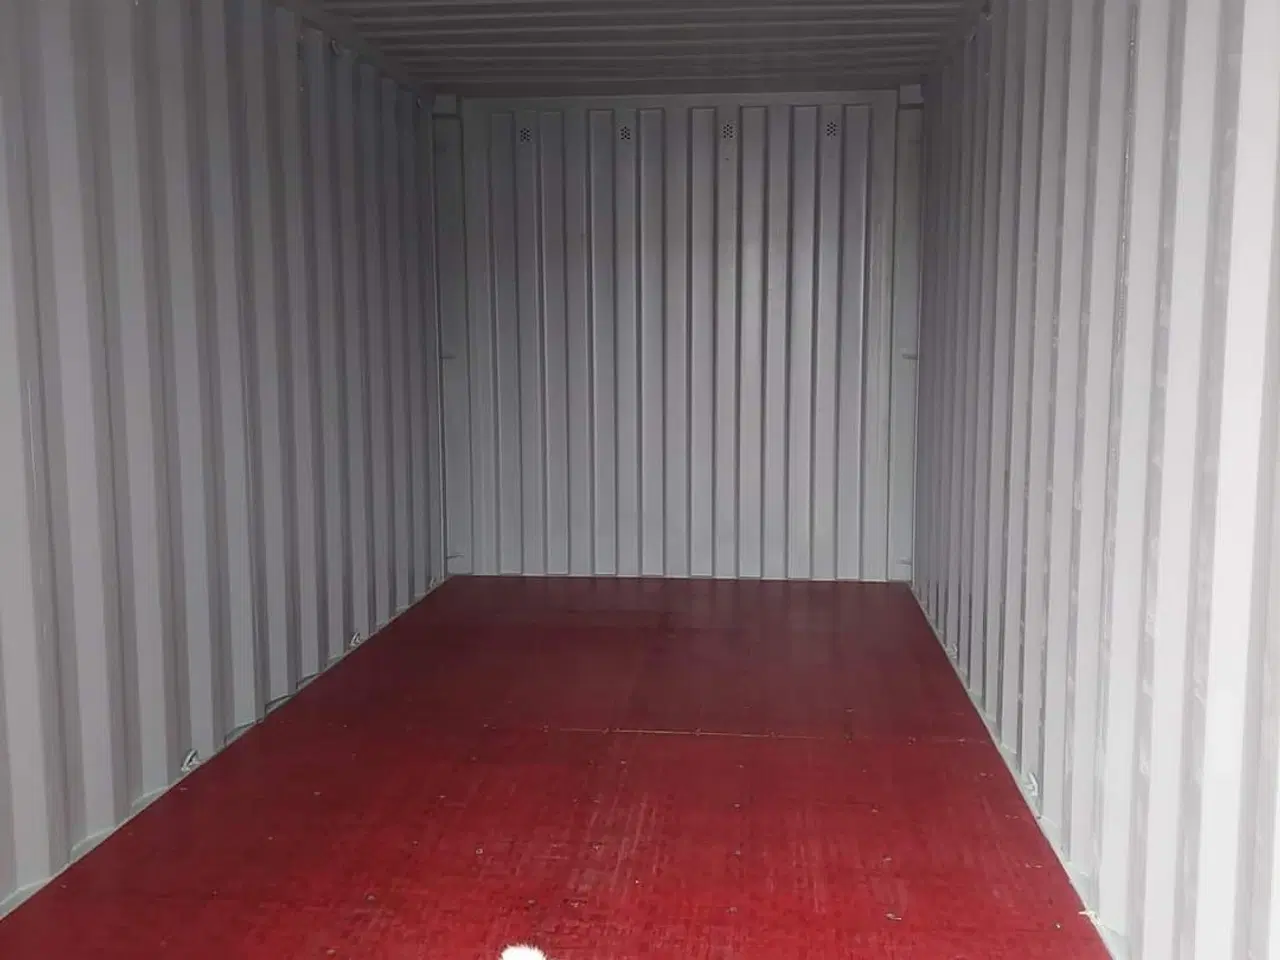 Billede 2 - Ny 20 fods container 